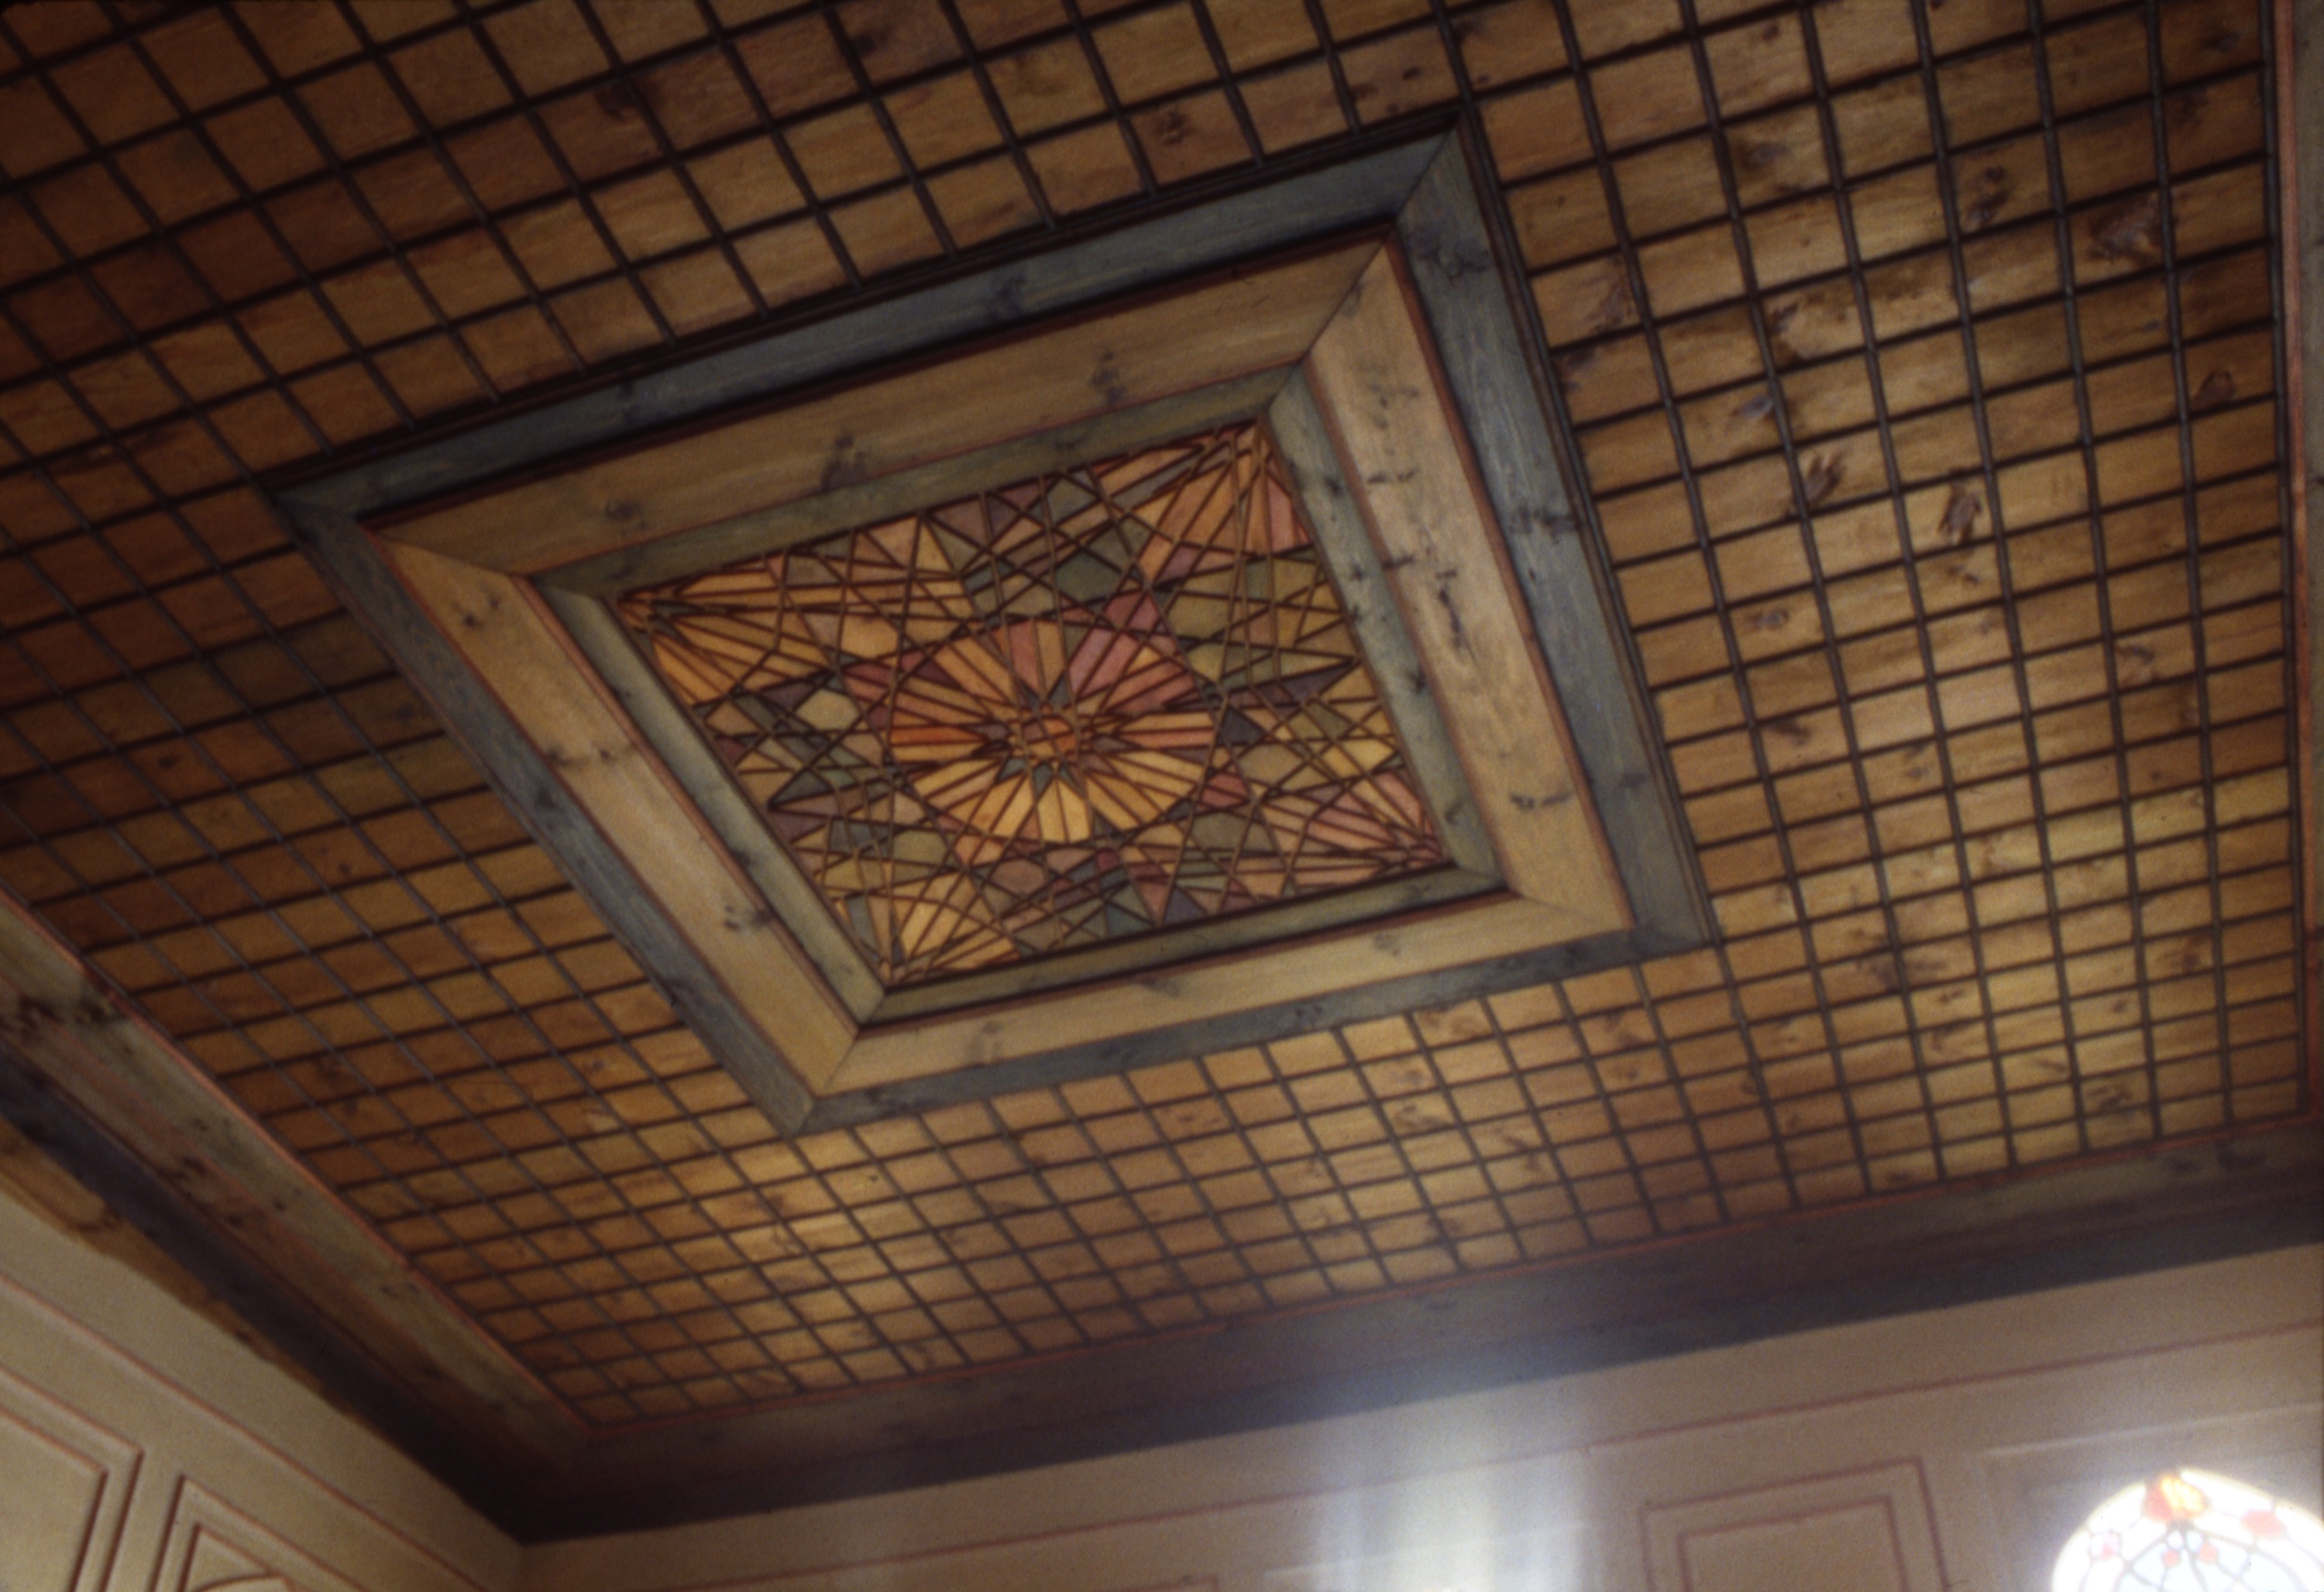 <p>The wooden ceiling of the kiosk area was constructed of panels, strips, and frames with a special center ornament. The ornament displays overlapping geometric shapes and stars that are formed through the use of grooves and a variety of colors applied to the wood. Center ceiling ornaments are present in many of the larger dwellings of the Ottoman and Bulgarian Revival periods.</p>